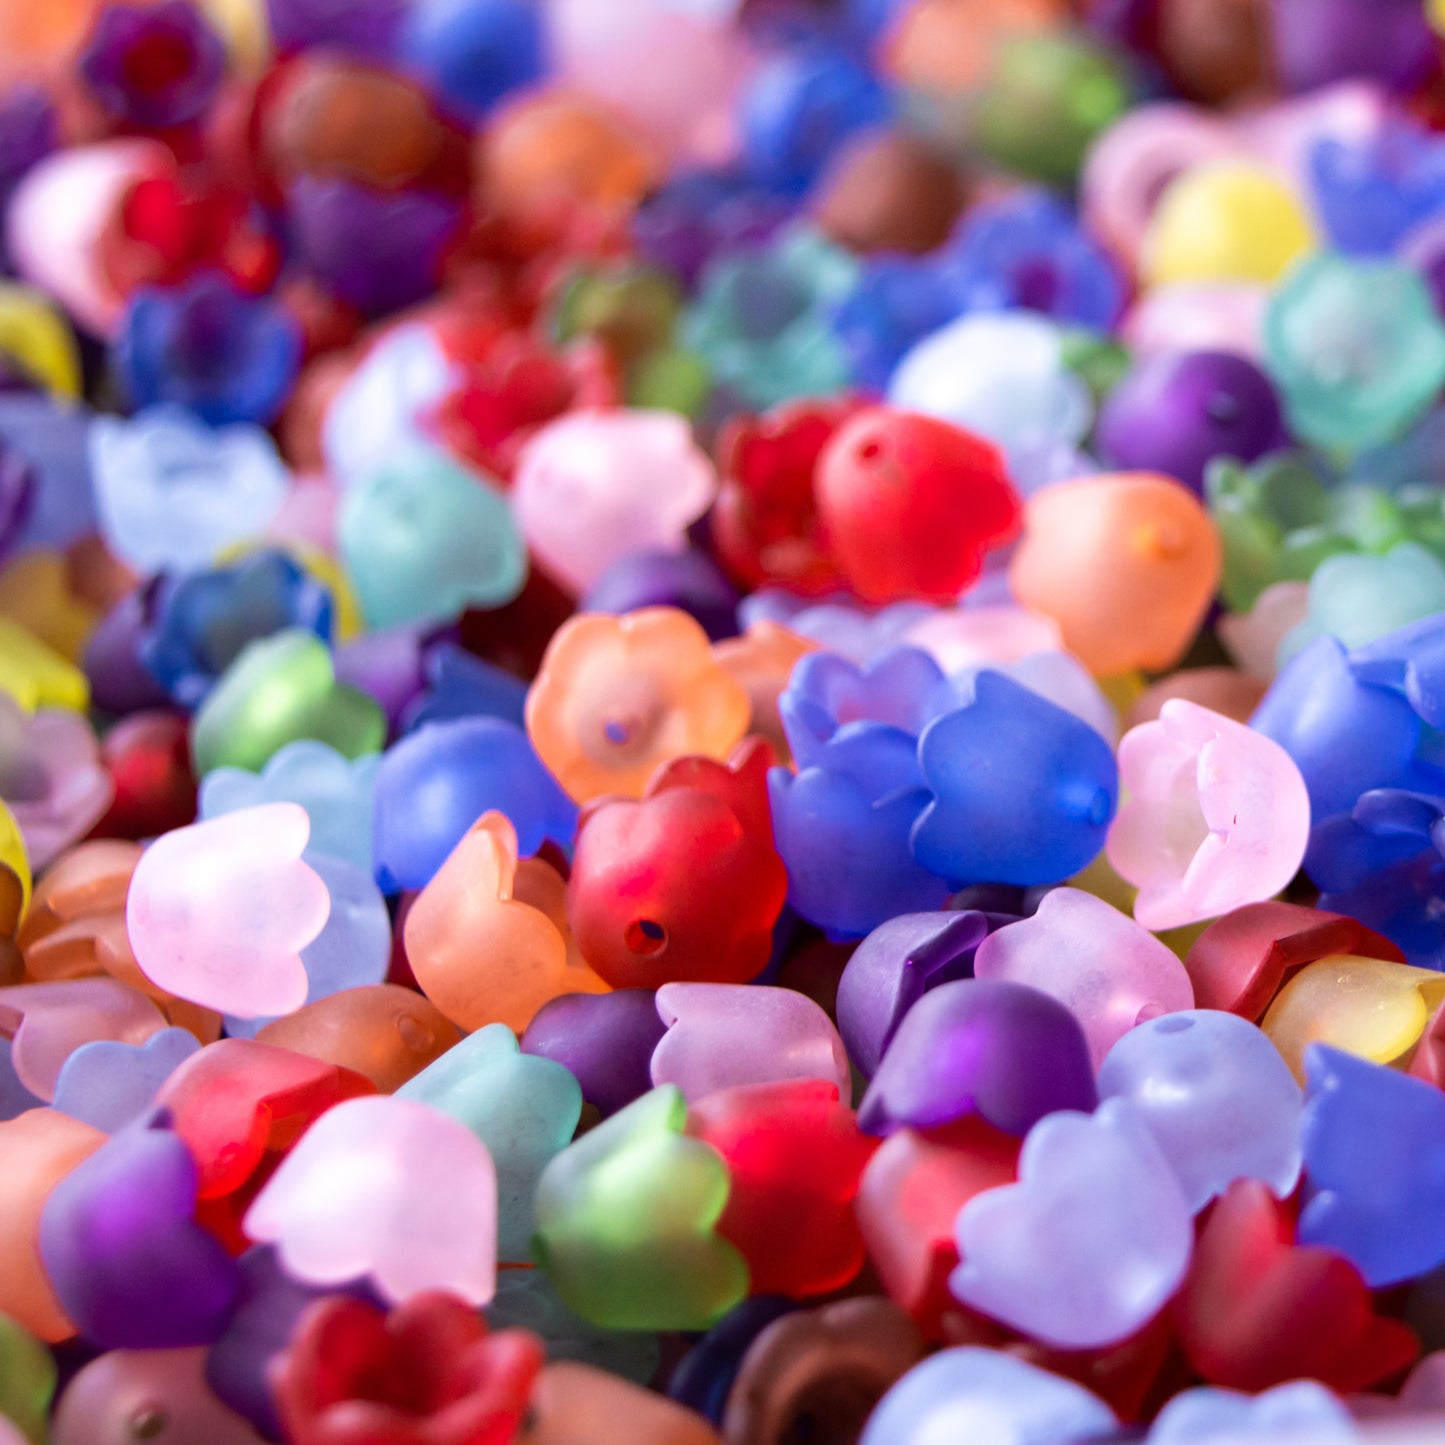 7x10mm Bell Flower Beads in Frosted Acrylic, Two Color Mixes Available